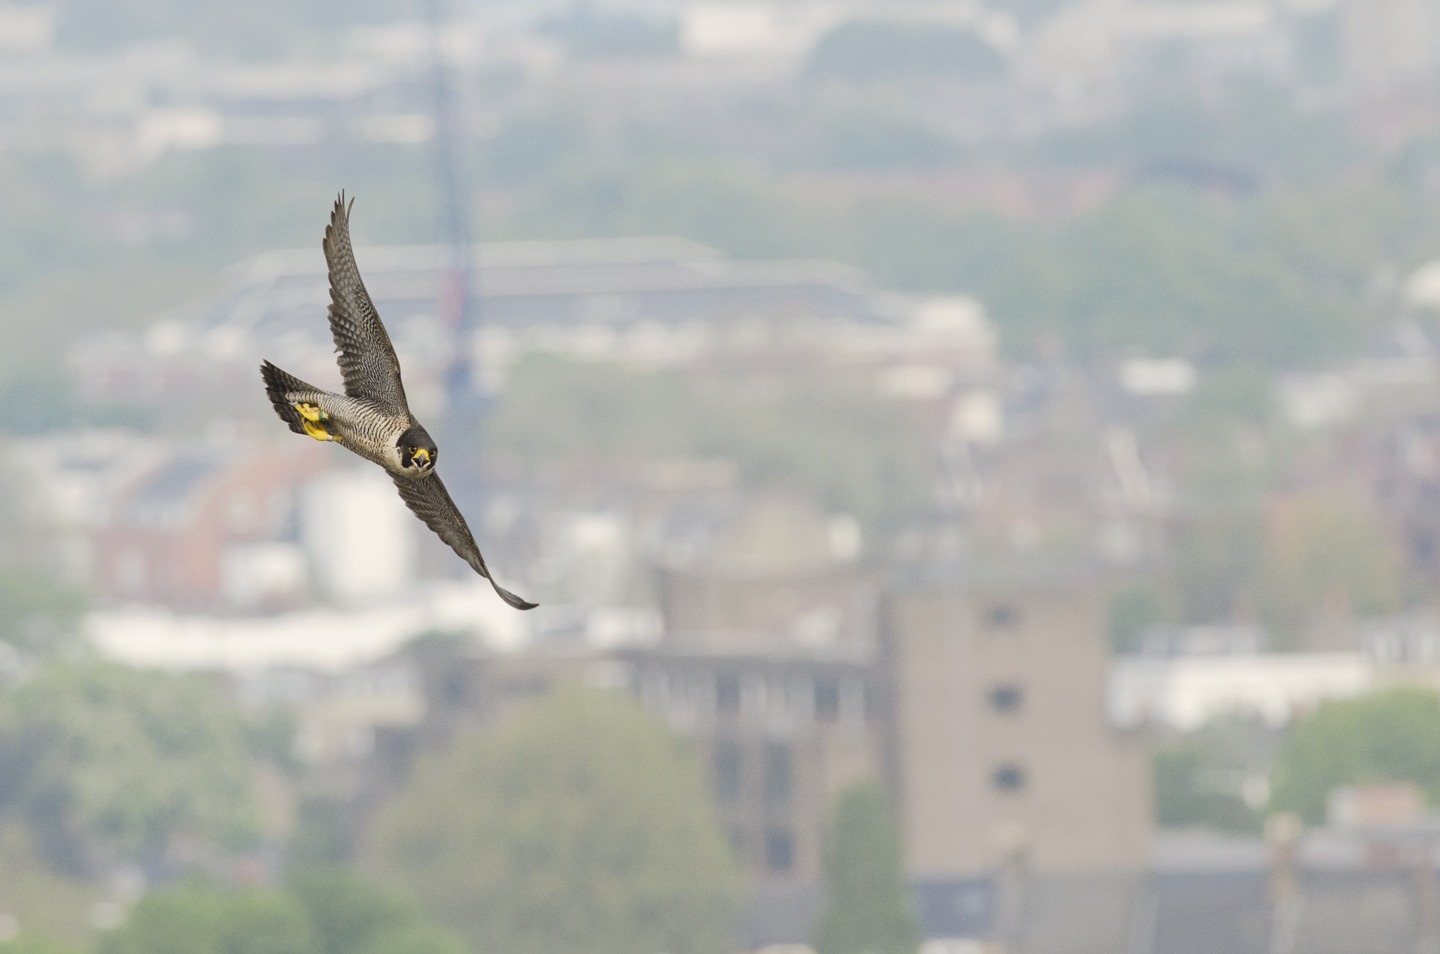   In recent years, these powerful falcons have become one of the UK's greatest urban wildlife success stories  